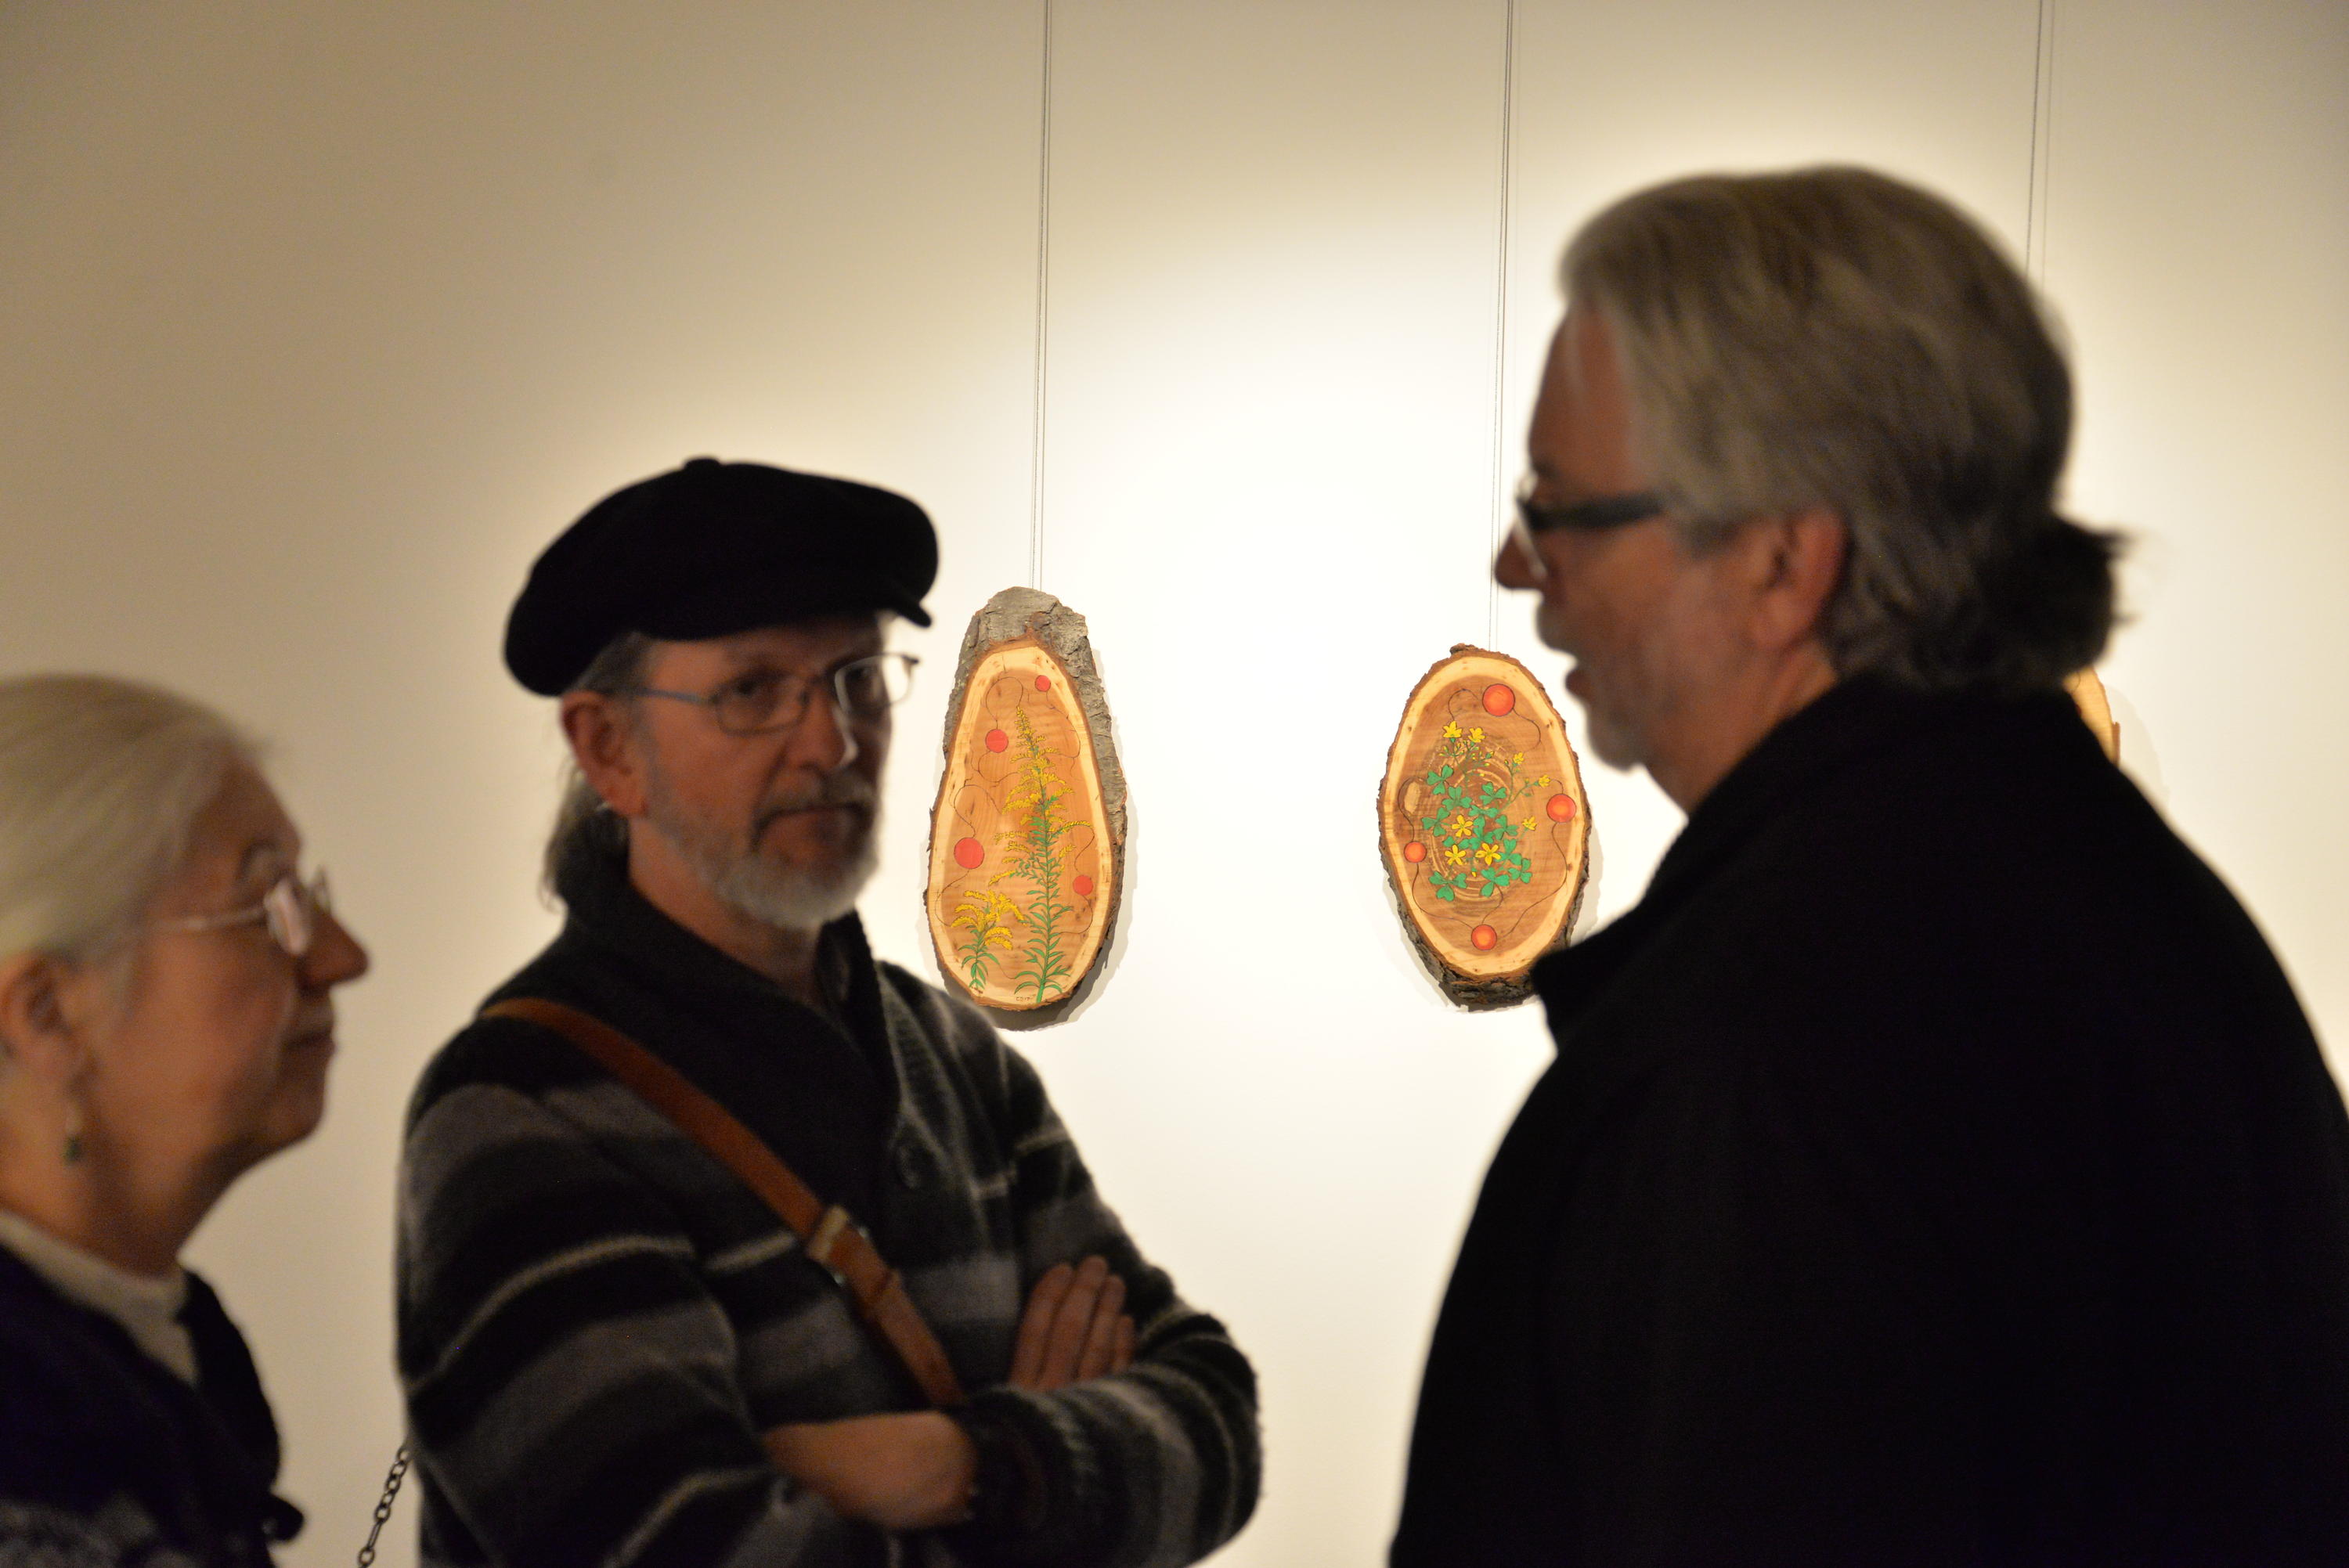 Conversations around the pieces "Goldenrod is Honoured" and "Wood Sorrel is Honoured"